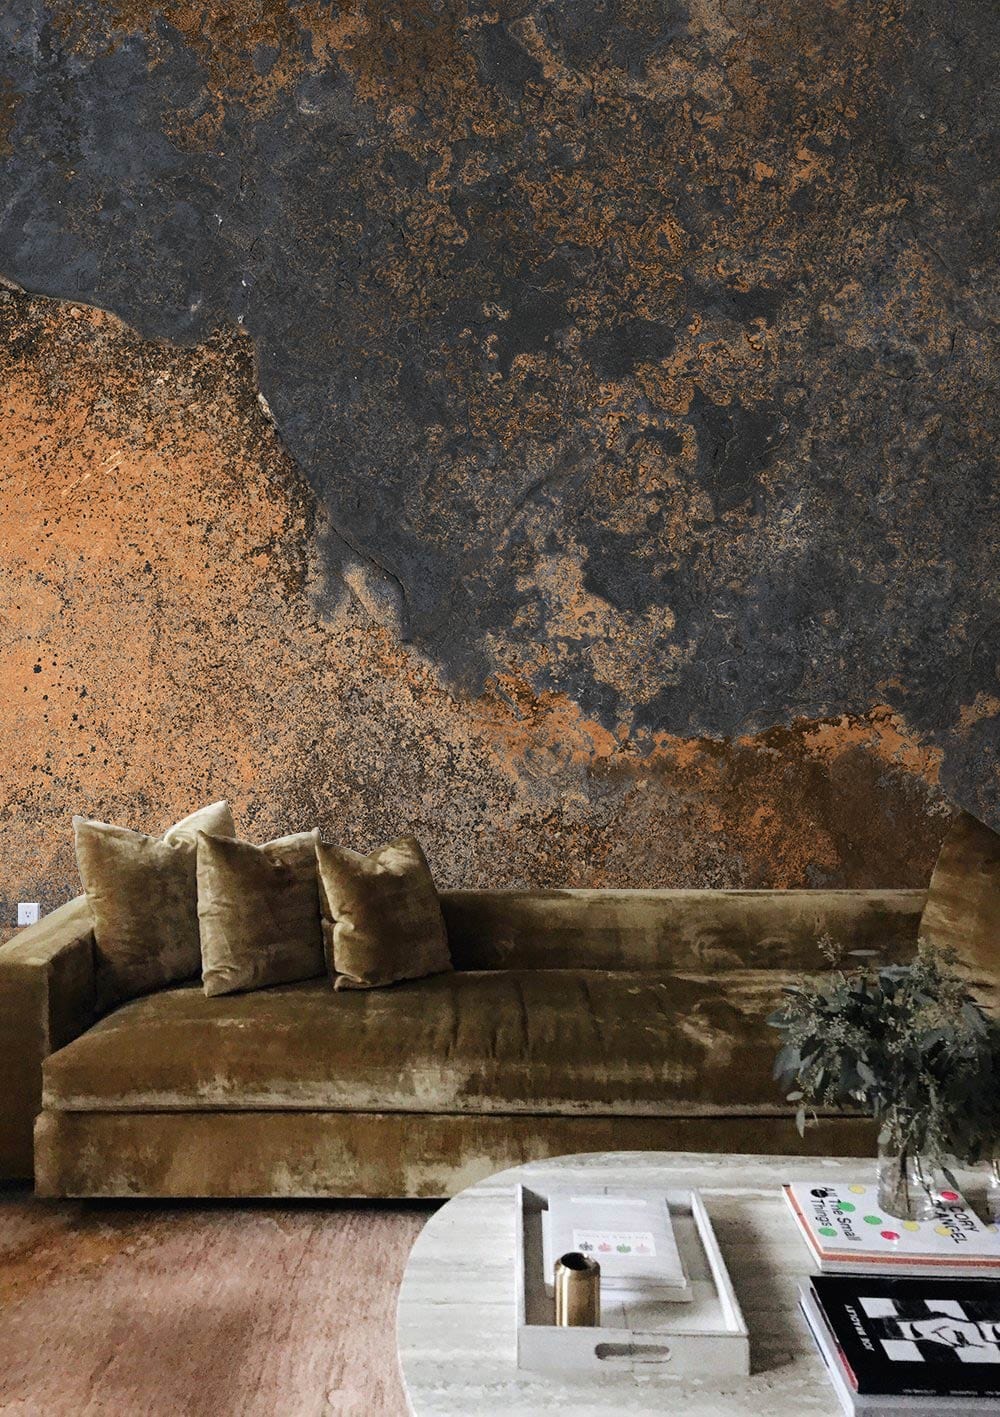 Living Room Wallpaper Mural Featuring the Cosmos and Industrial Scenery